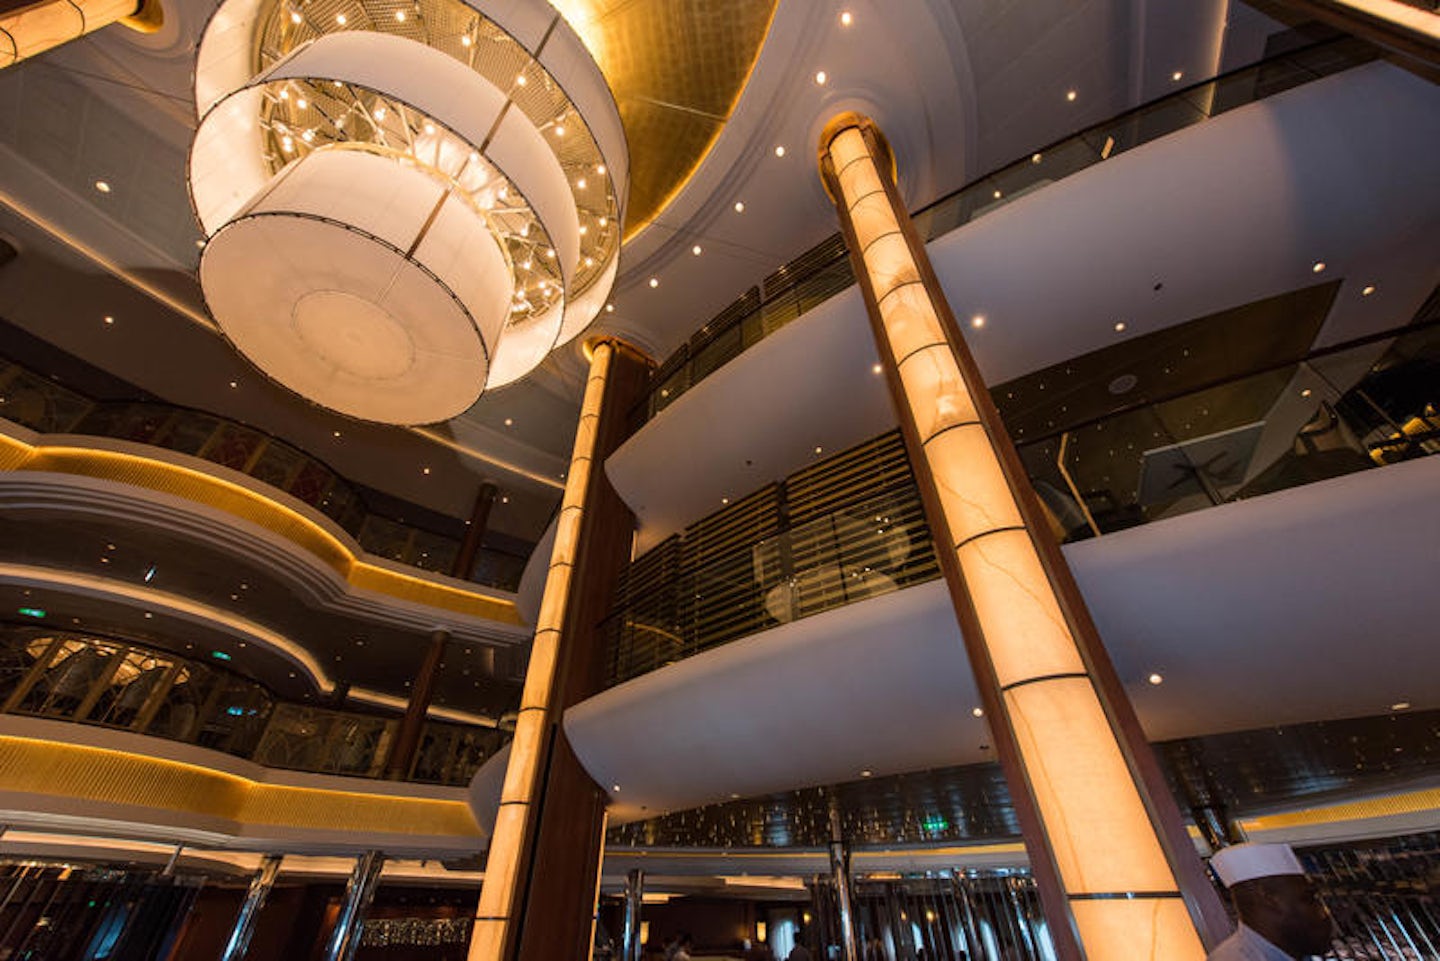 American Icon Grill on Oasis of the Seas